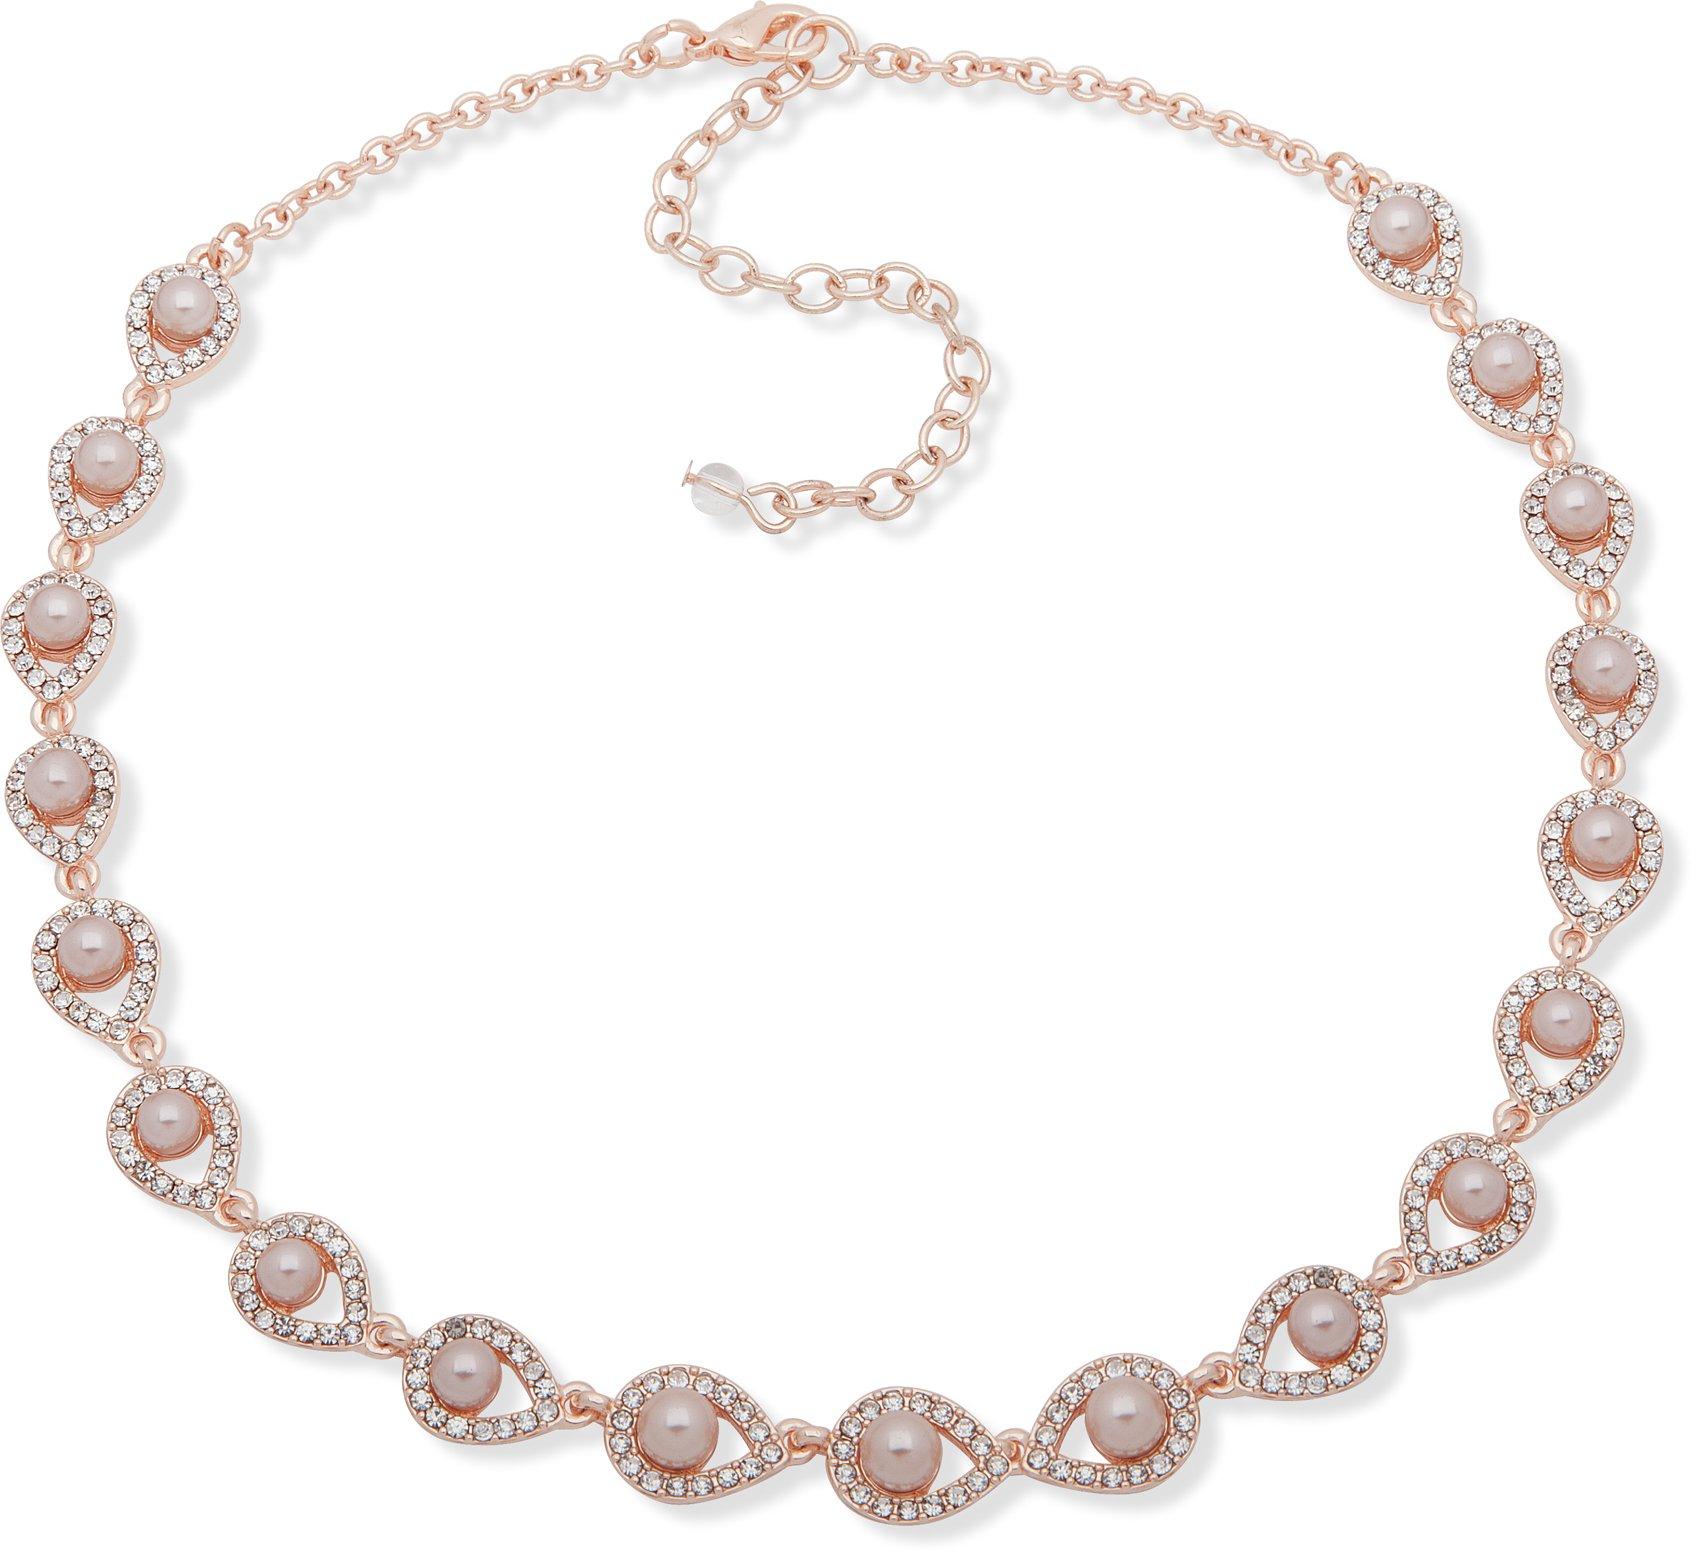 You're Invited Rose Gold Tone Faux Pearl Collar Necklace